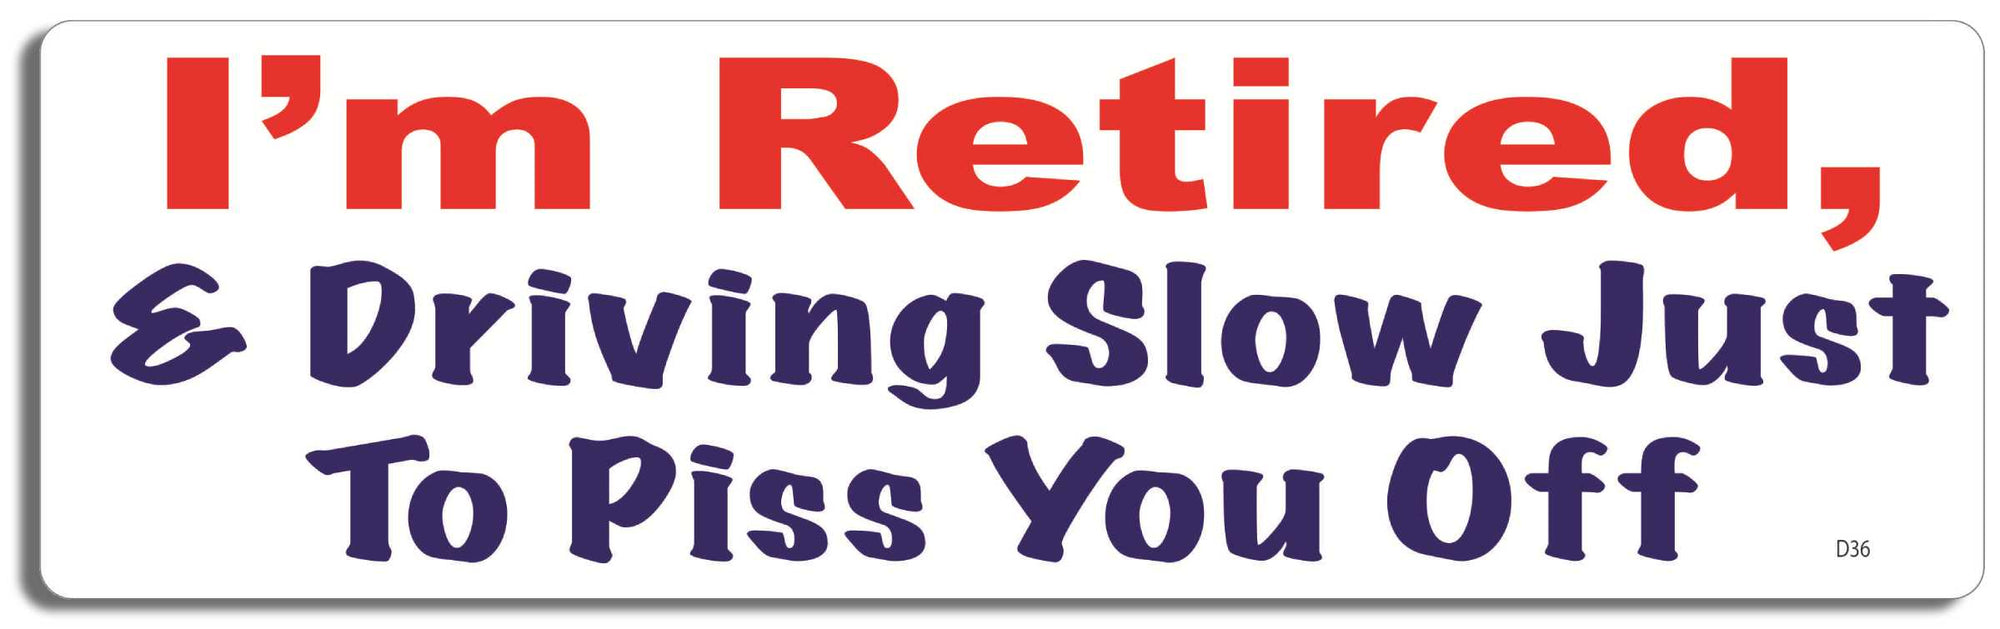 I'm retired & driving slow just to piss you off - 3" x 10" Bumper Sticker--Car Magnet- -  Decal Car Car Magnet-funny Bumper Sticker Car Magnet I'm retired & driving slow just to-  Decal for carsdrive safely, Driving, Funny, safe driving, tailgaters, tailgating